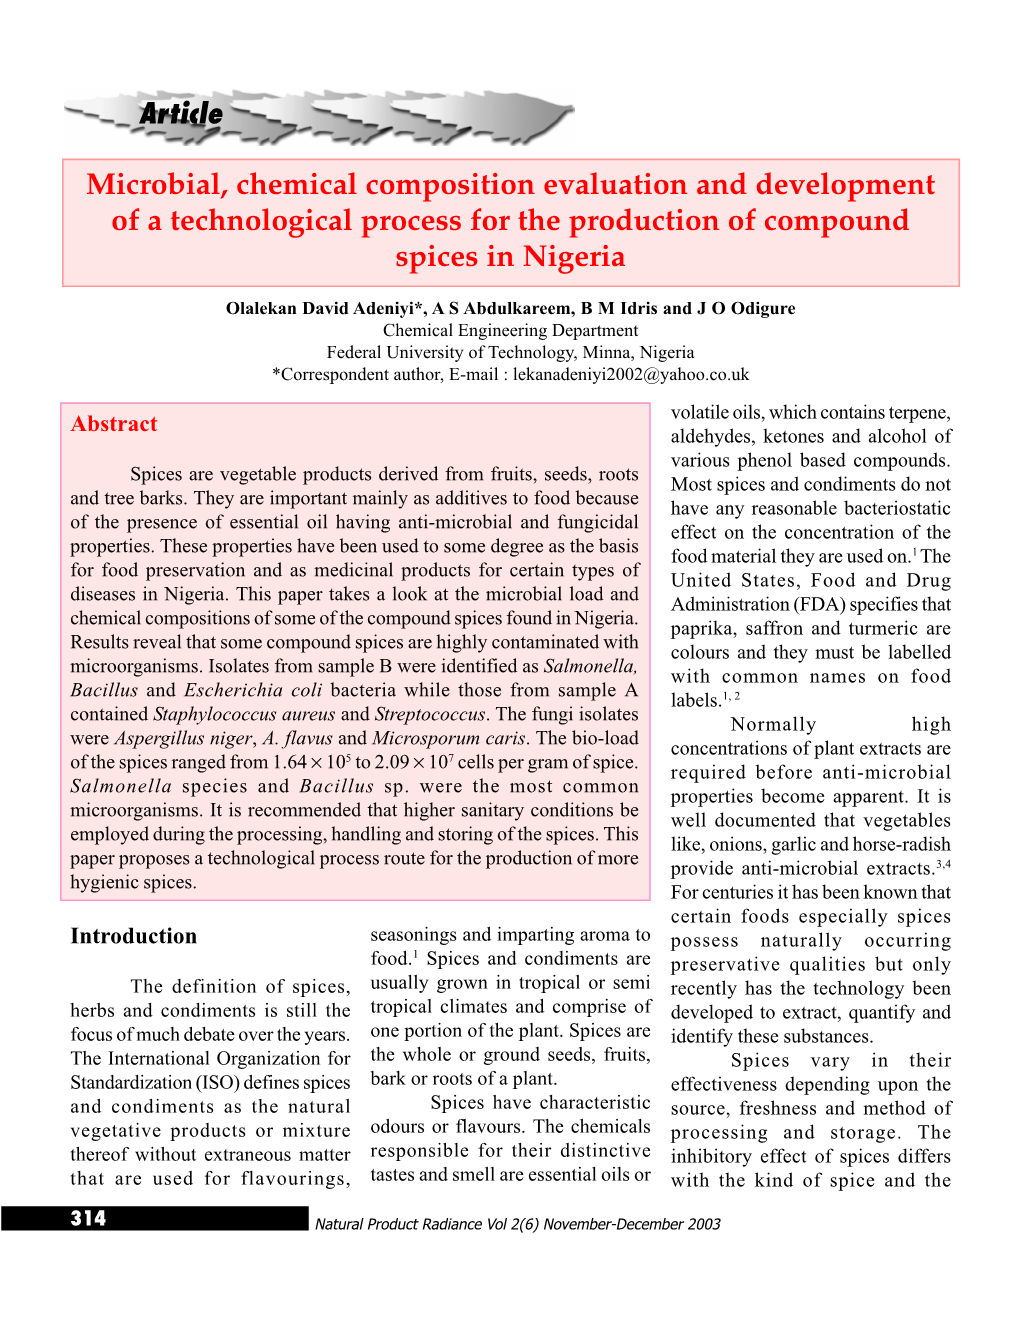 Microbial, Chemical Composition Evaluation and Development of a Technological Process for the Production of Compound Spices in Nigeria